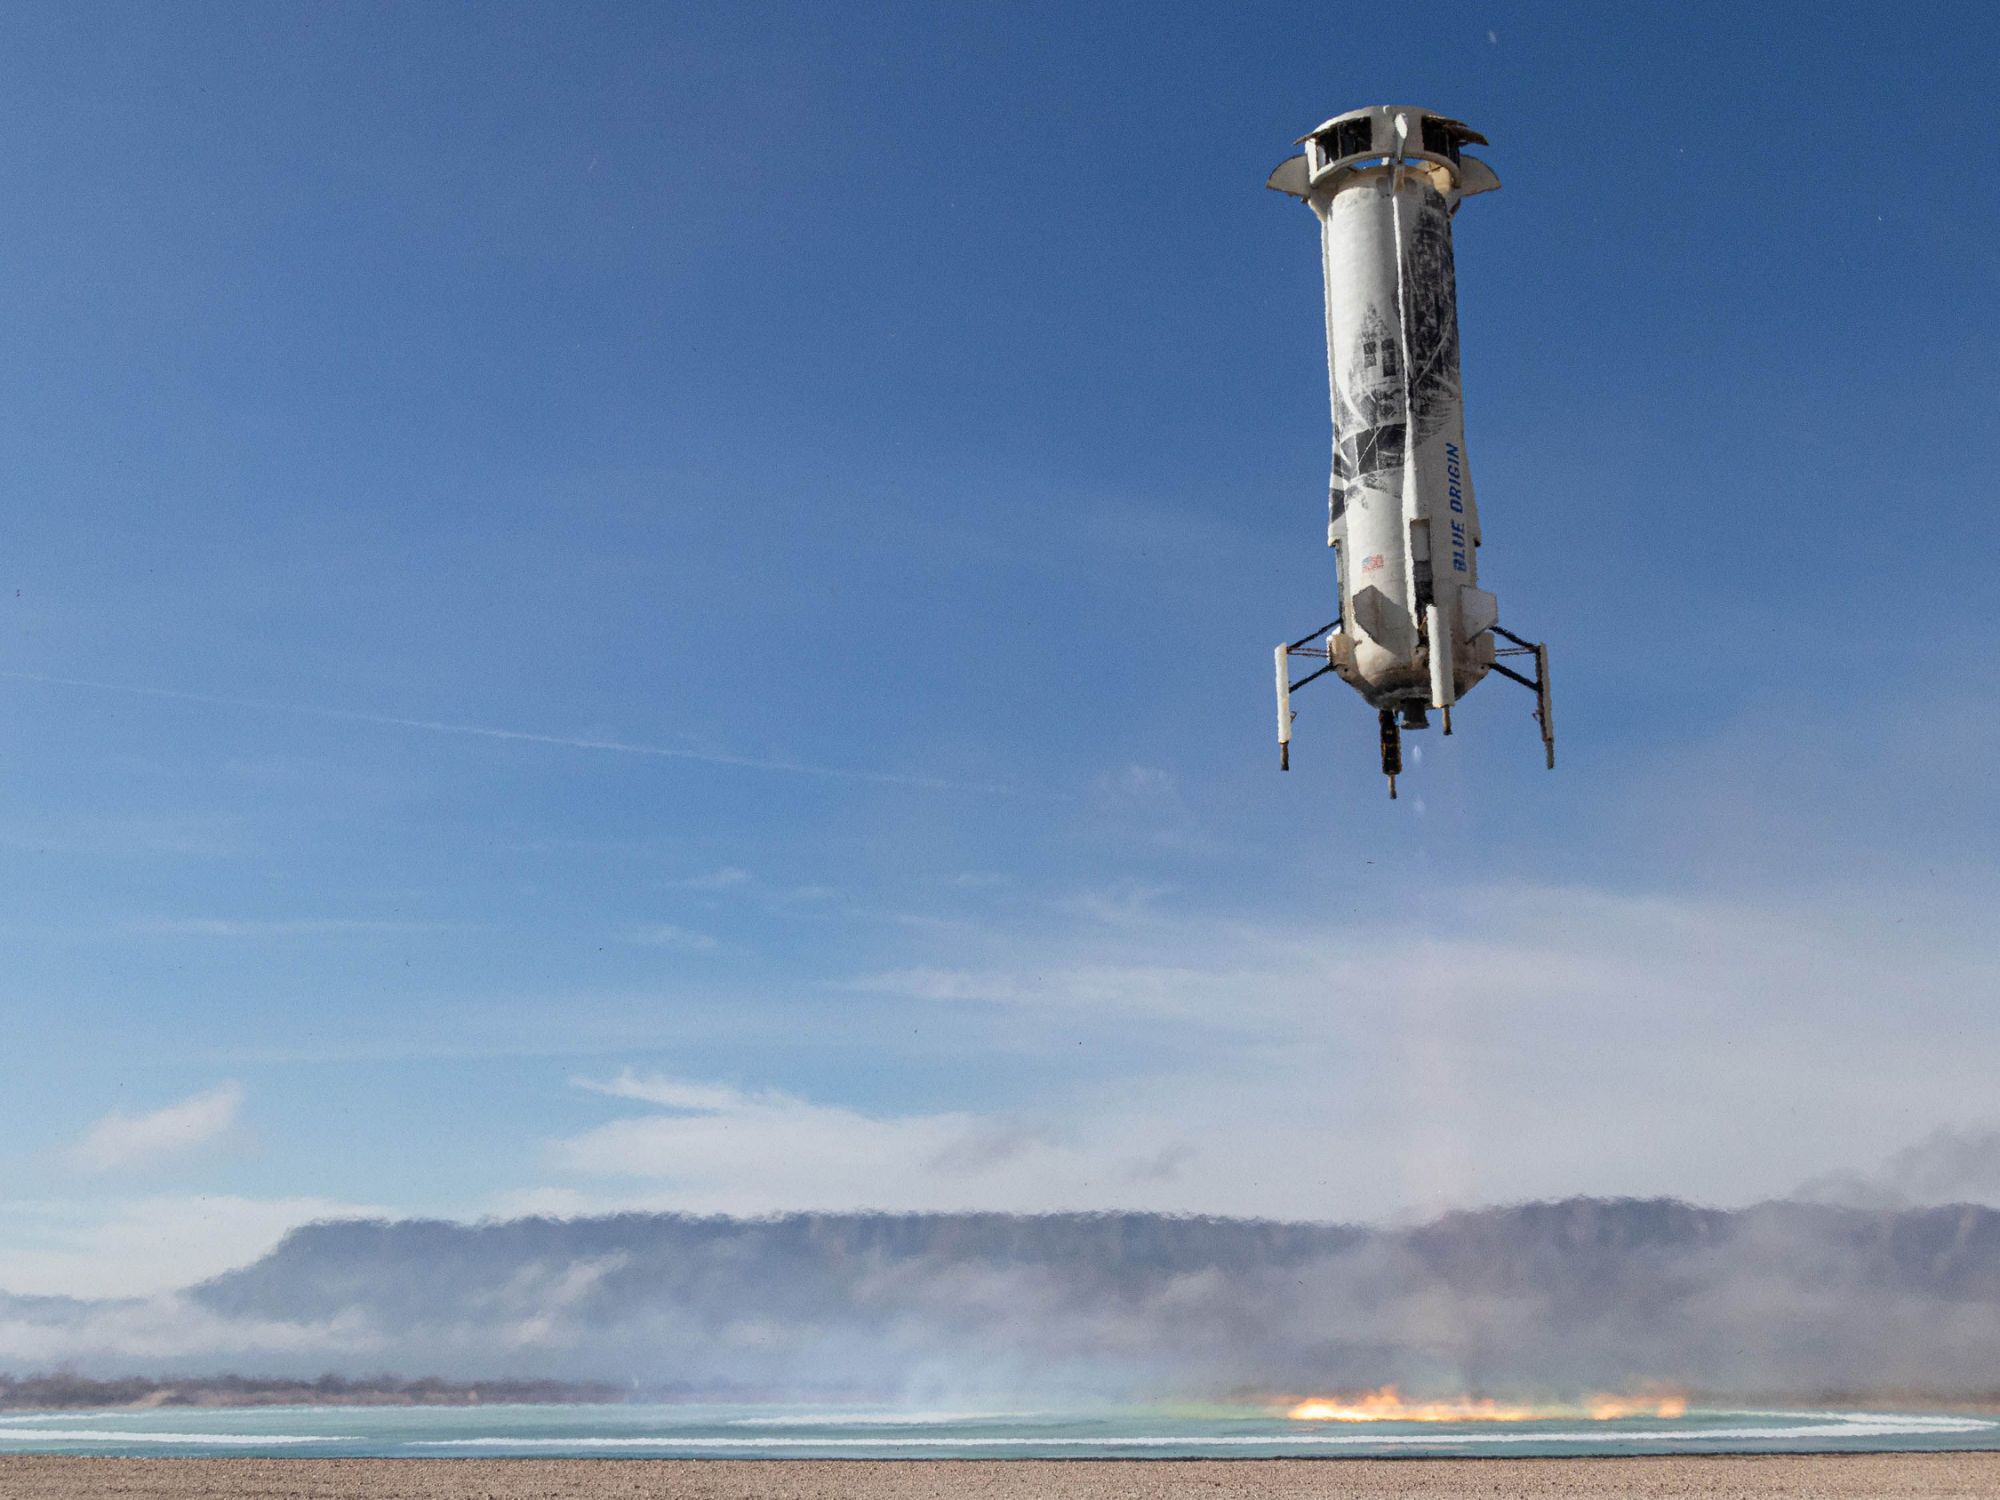 Blue Origin set to launch a New Shepard rocket outfitted with crew upgrades as it readies for astronaut flight